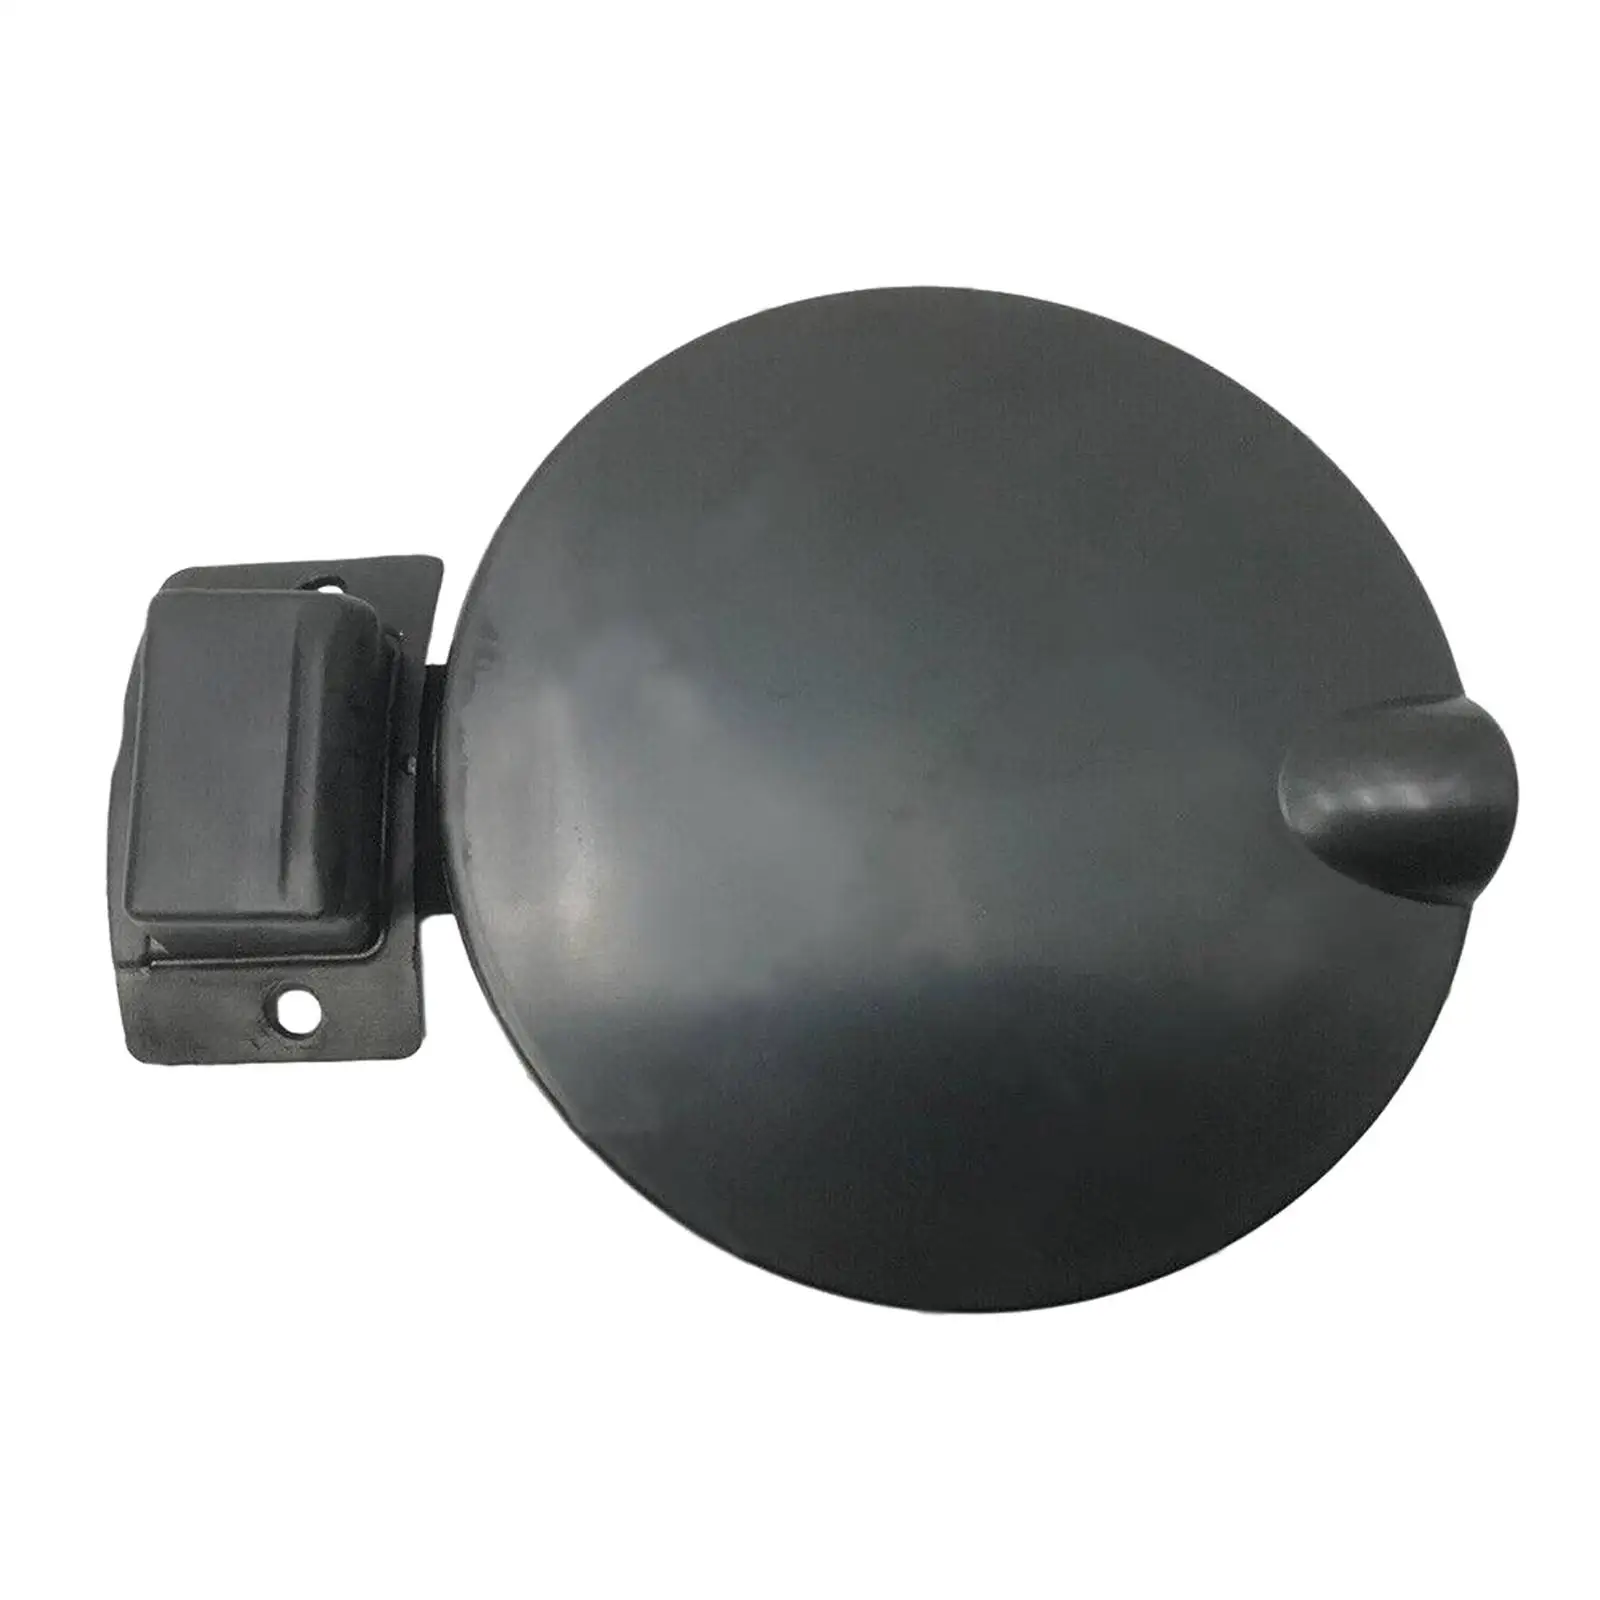 Fuel Filler Cap Car Accessories Repair Fuel Filler Flap Cover Lid for Holden 2000 to 2007 Commodore Ute Replacement